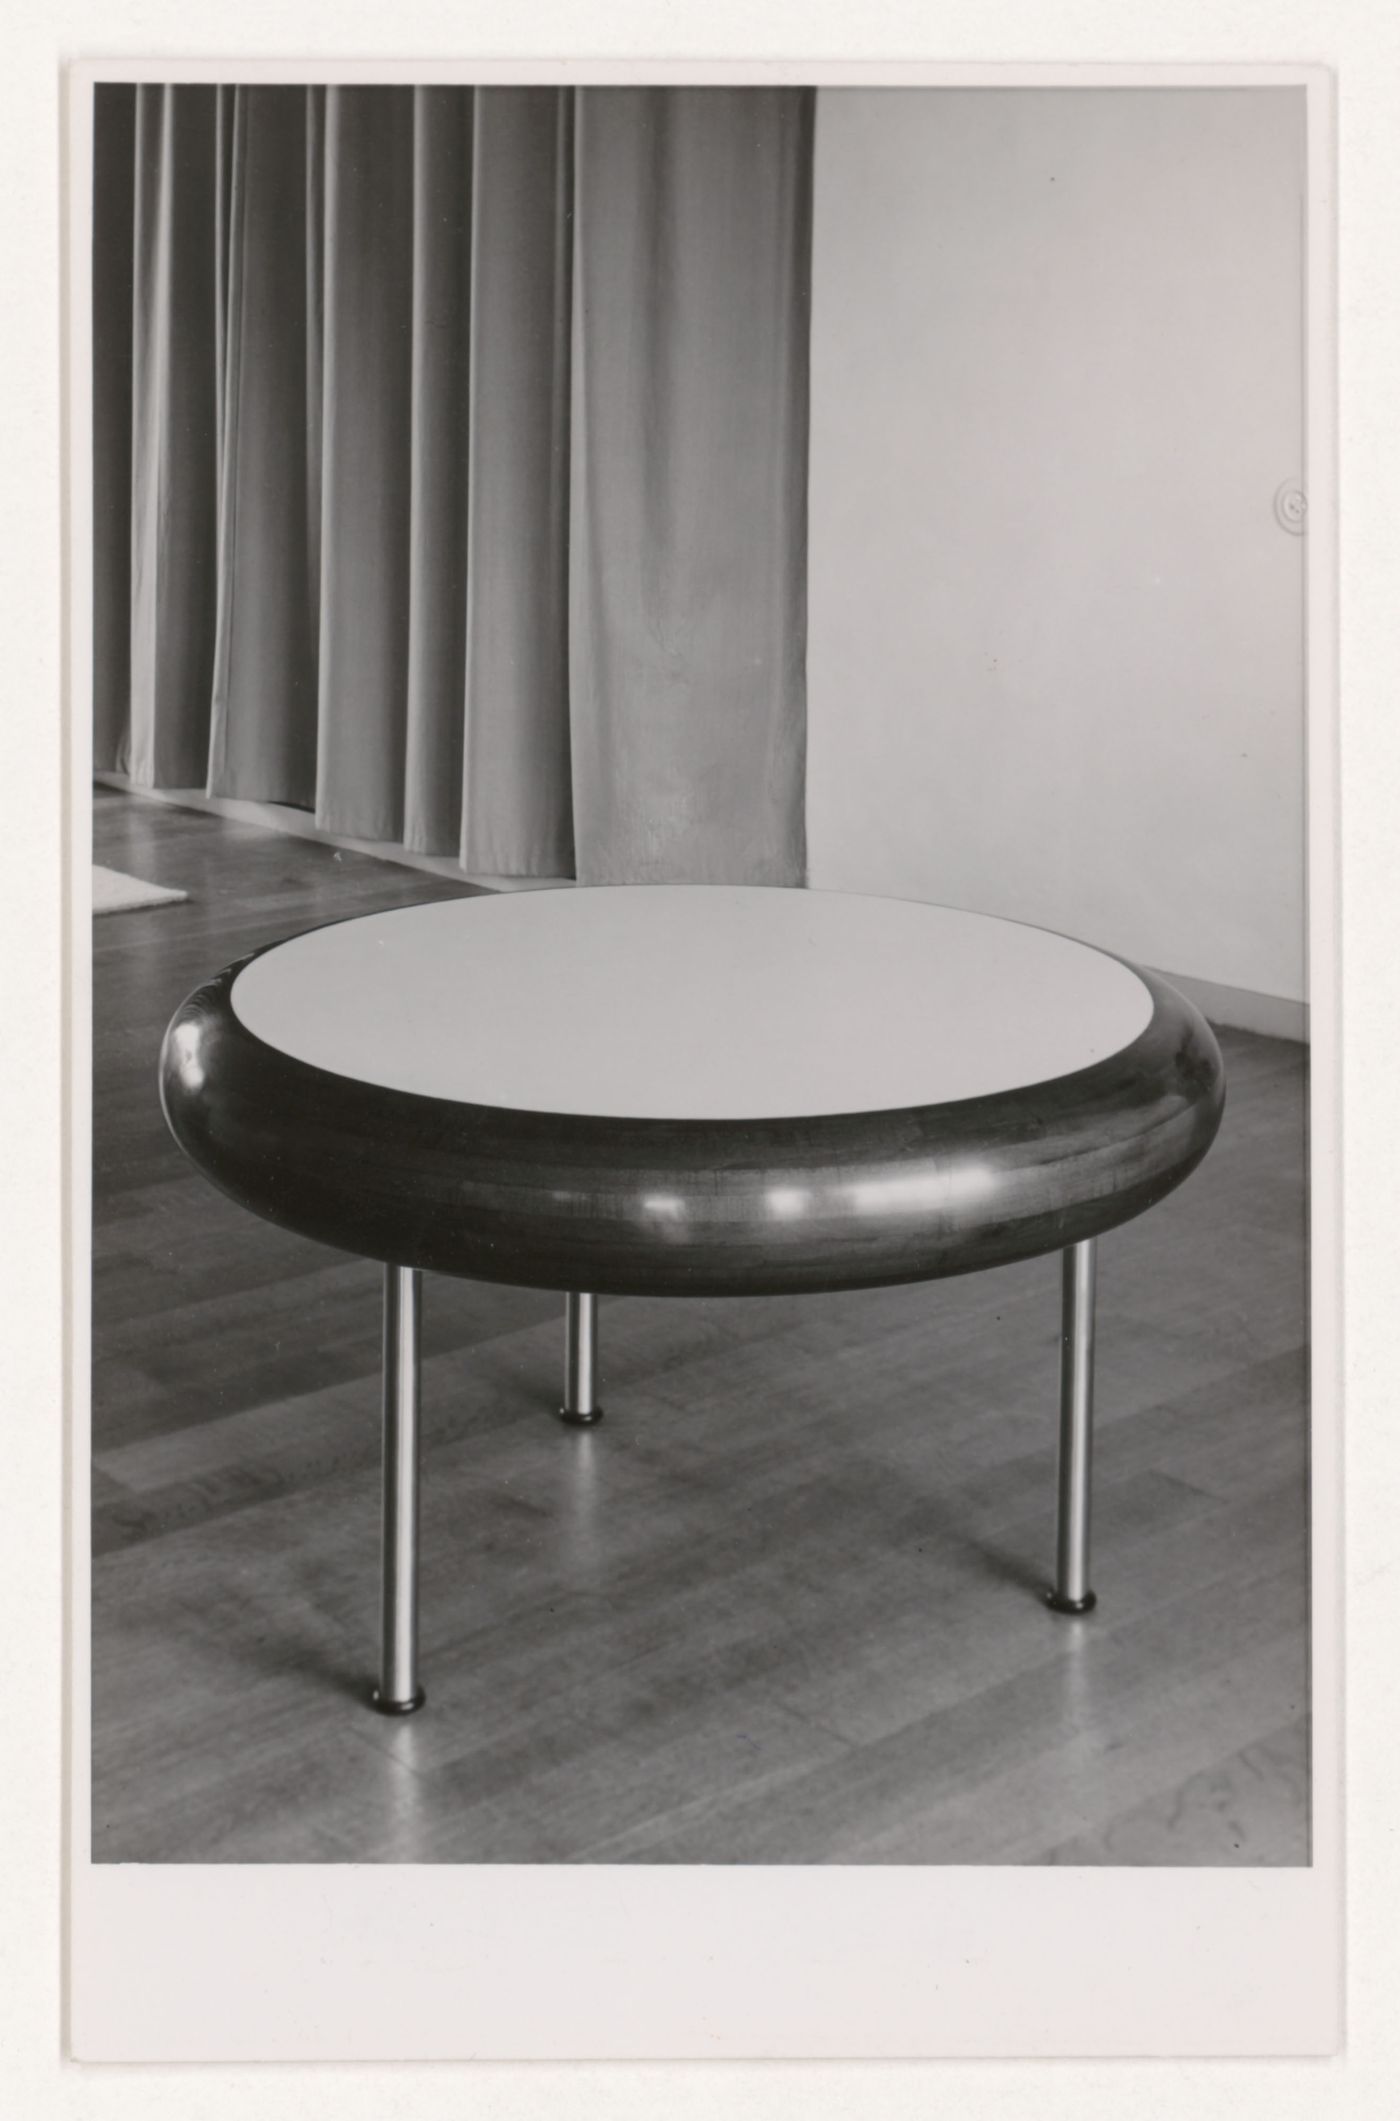 View of a table designed by J.J.P. Oud for Central Savings Bank, Rotterdam, Netherlands